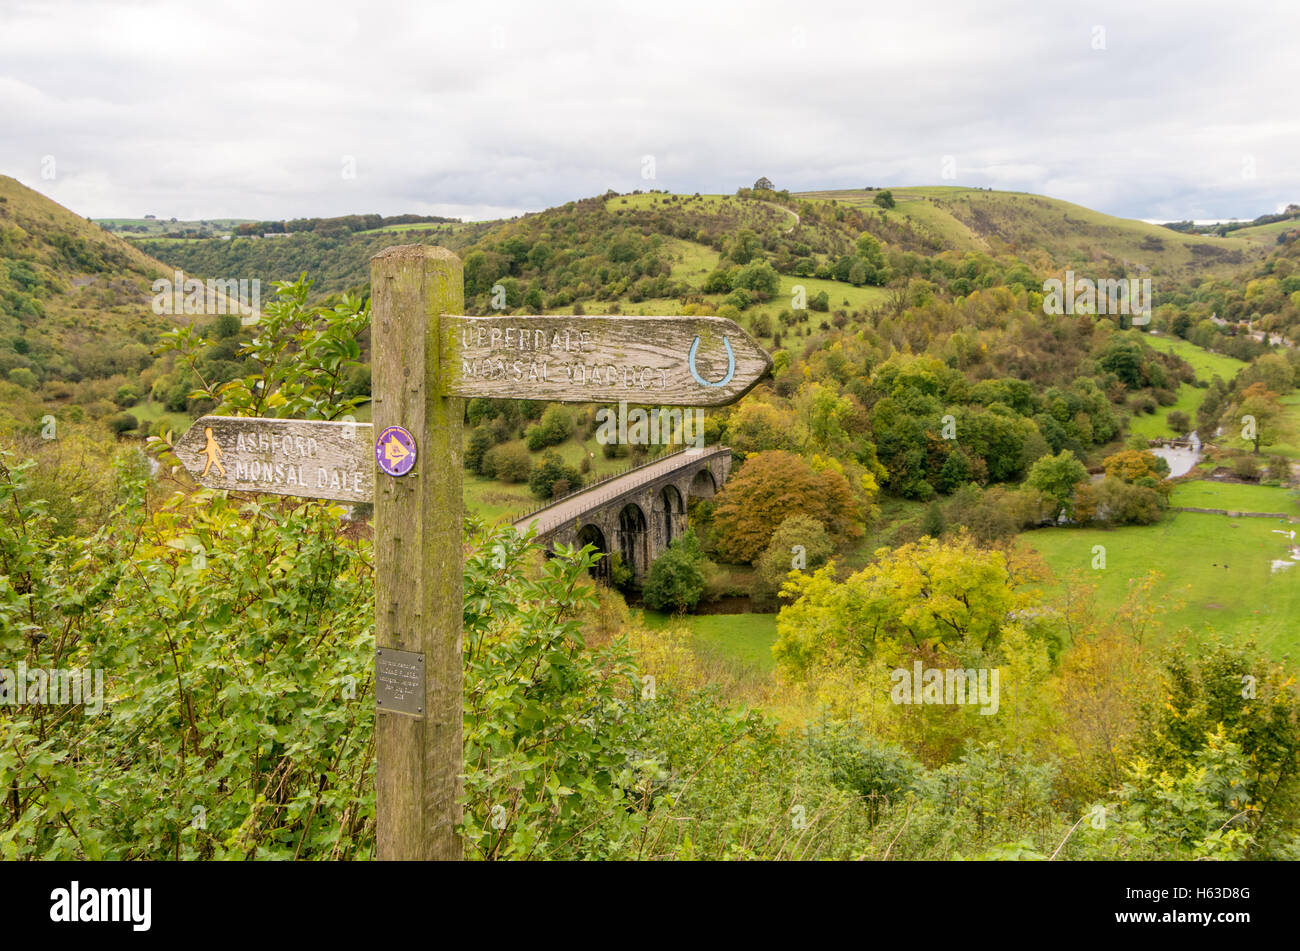 Looking down on the viaduct at Monsal Head in the Derbyshire Peak District, UK, past the footpath direction signpost. Stock Photo